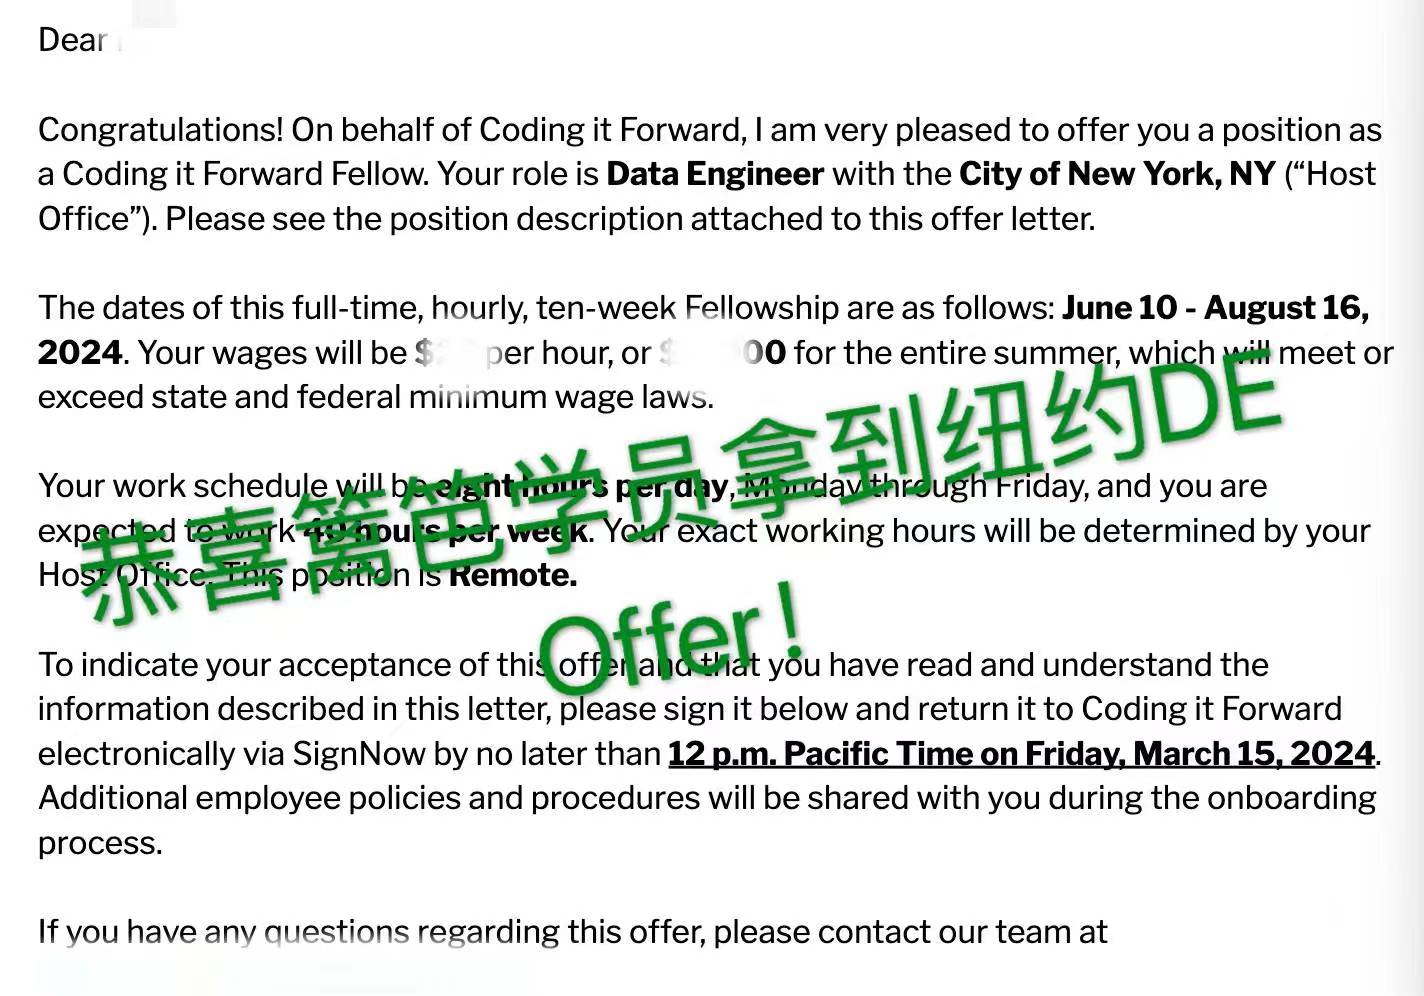 nyc department of city planning的DE offer